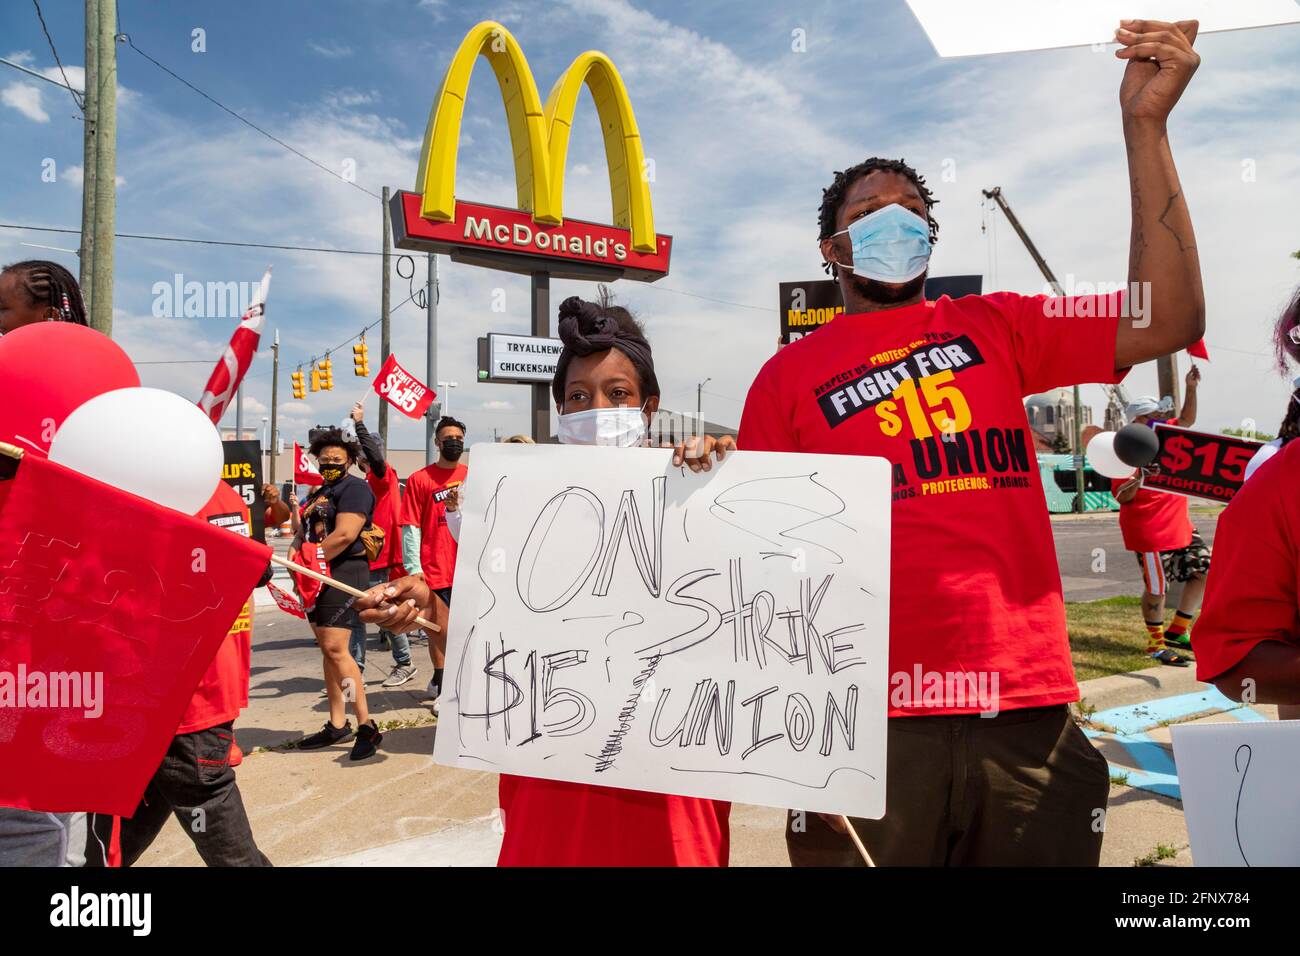 Detroit, Michigan, USA. 19th May, 2021. Fast food workers rally at a McDonald's restaurant for a $15 minimum wage. It was part of a one-day strike against McDonald's in 15 cities. Credit: Jim West/Alamy Live News Stock Photo